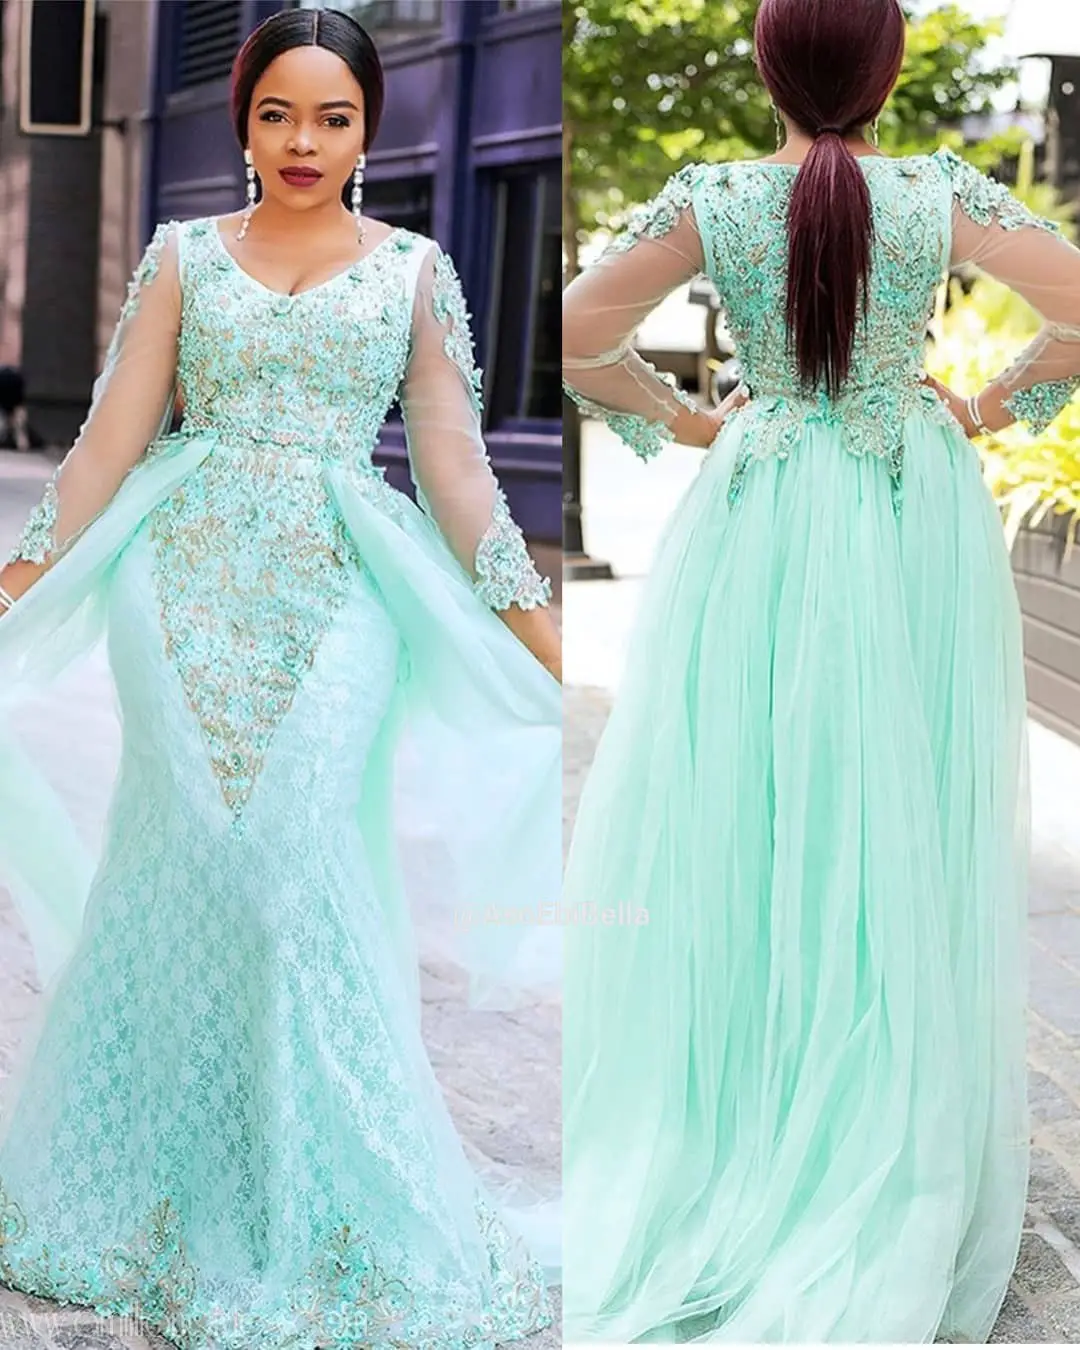 Latest Nigerian Lace Styles and Designs-Volume 1 